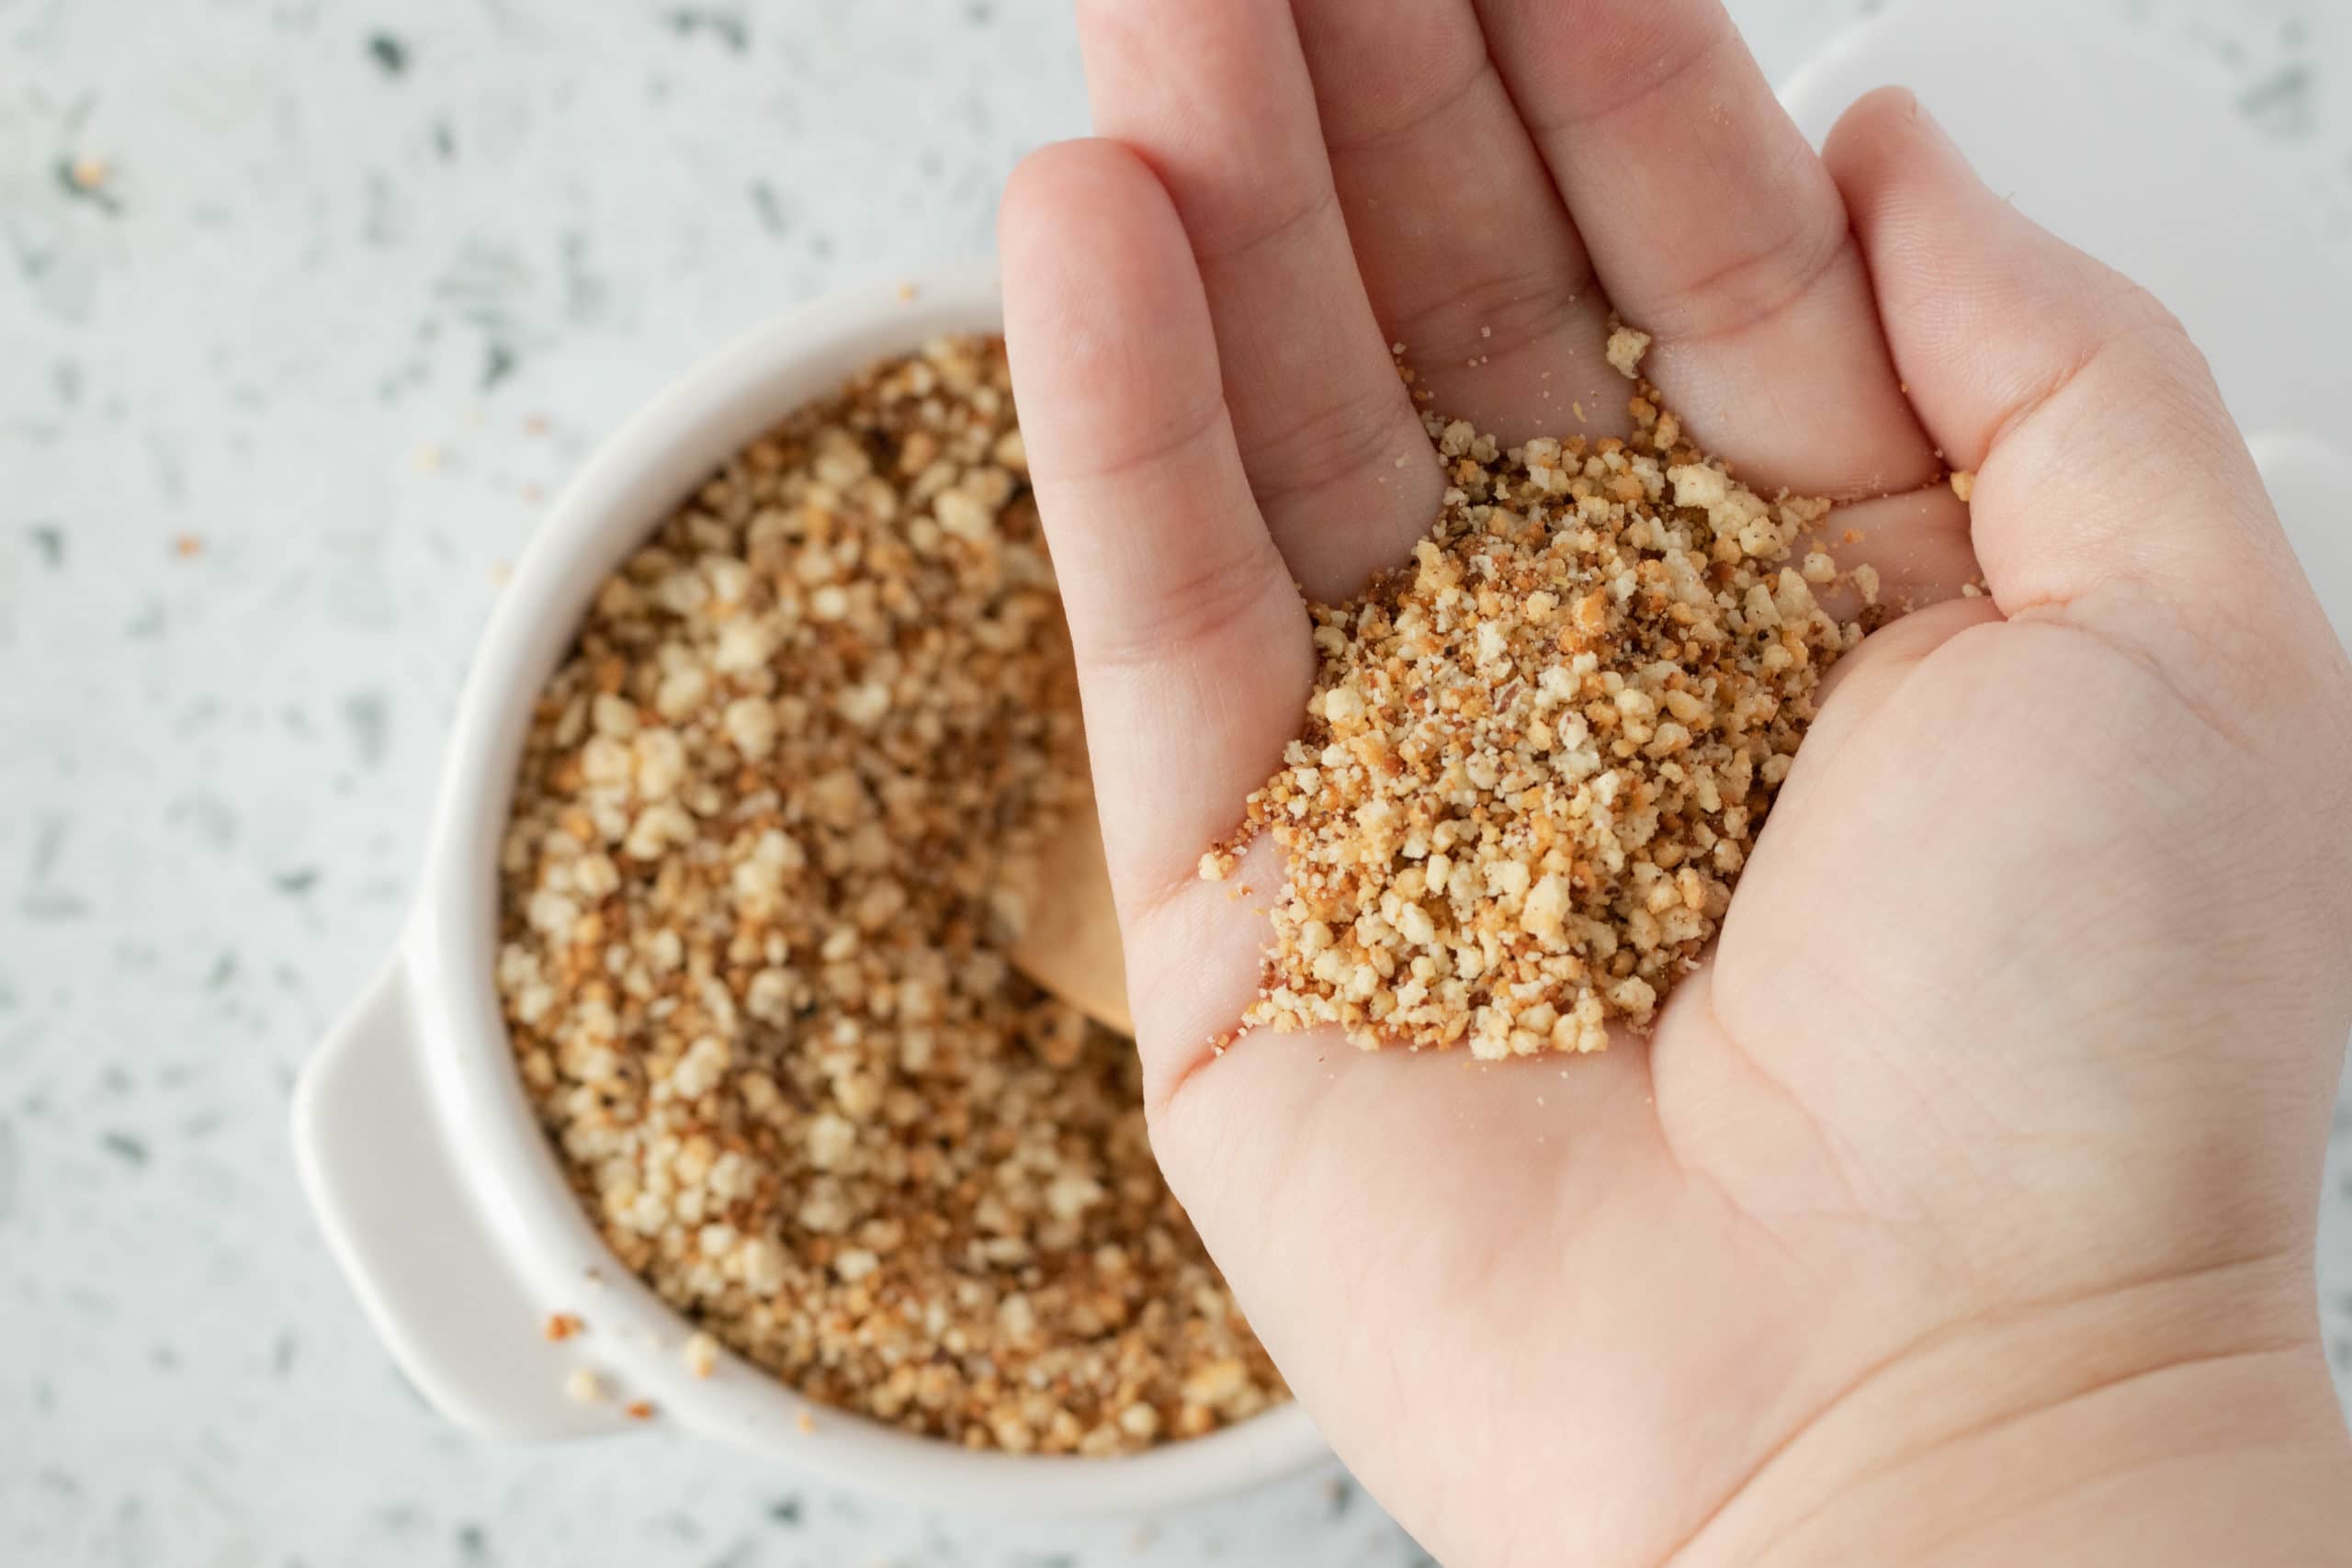 Make gluten free bread crumbs with this easy 3 ingredient recipe. Simply seasoned, these keto breadcrumbs are a great pork rind or panko substitute.